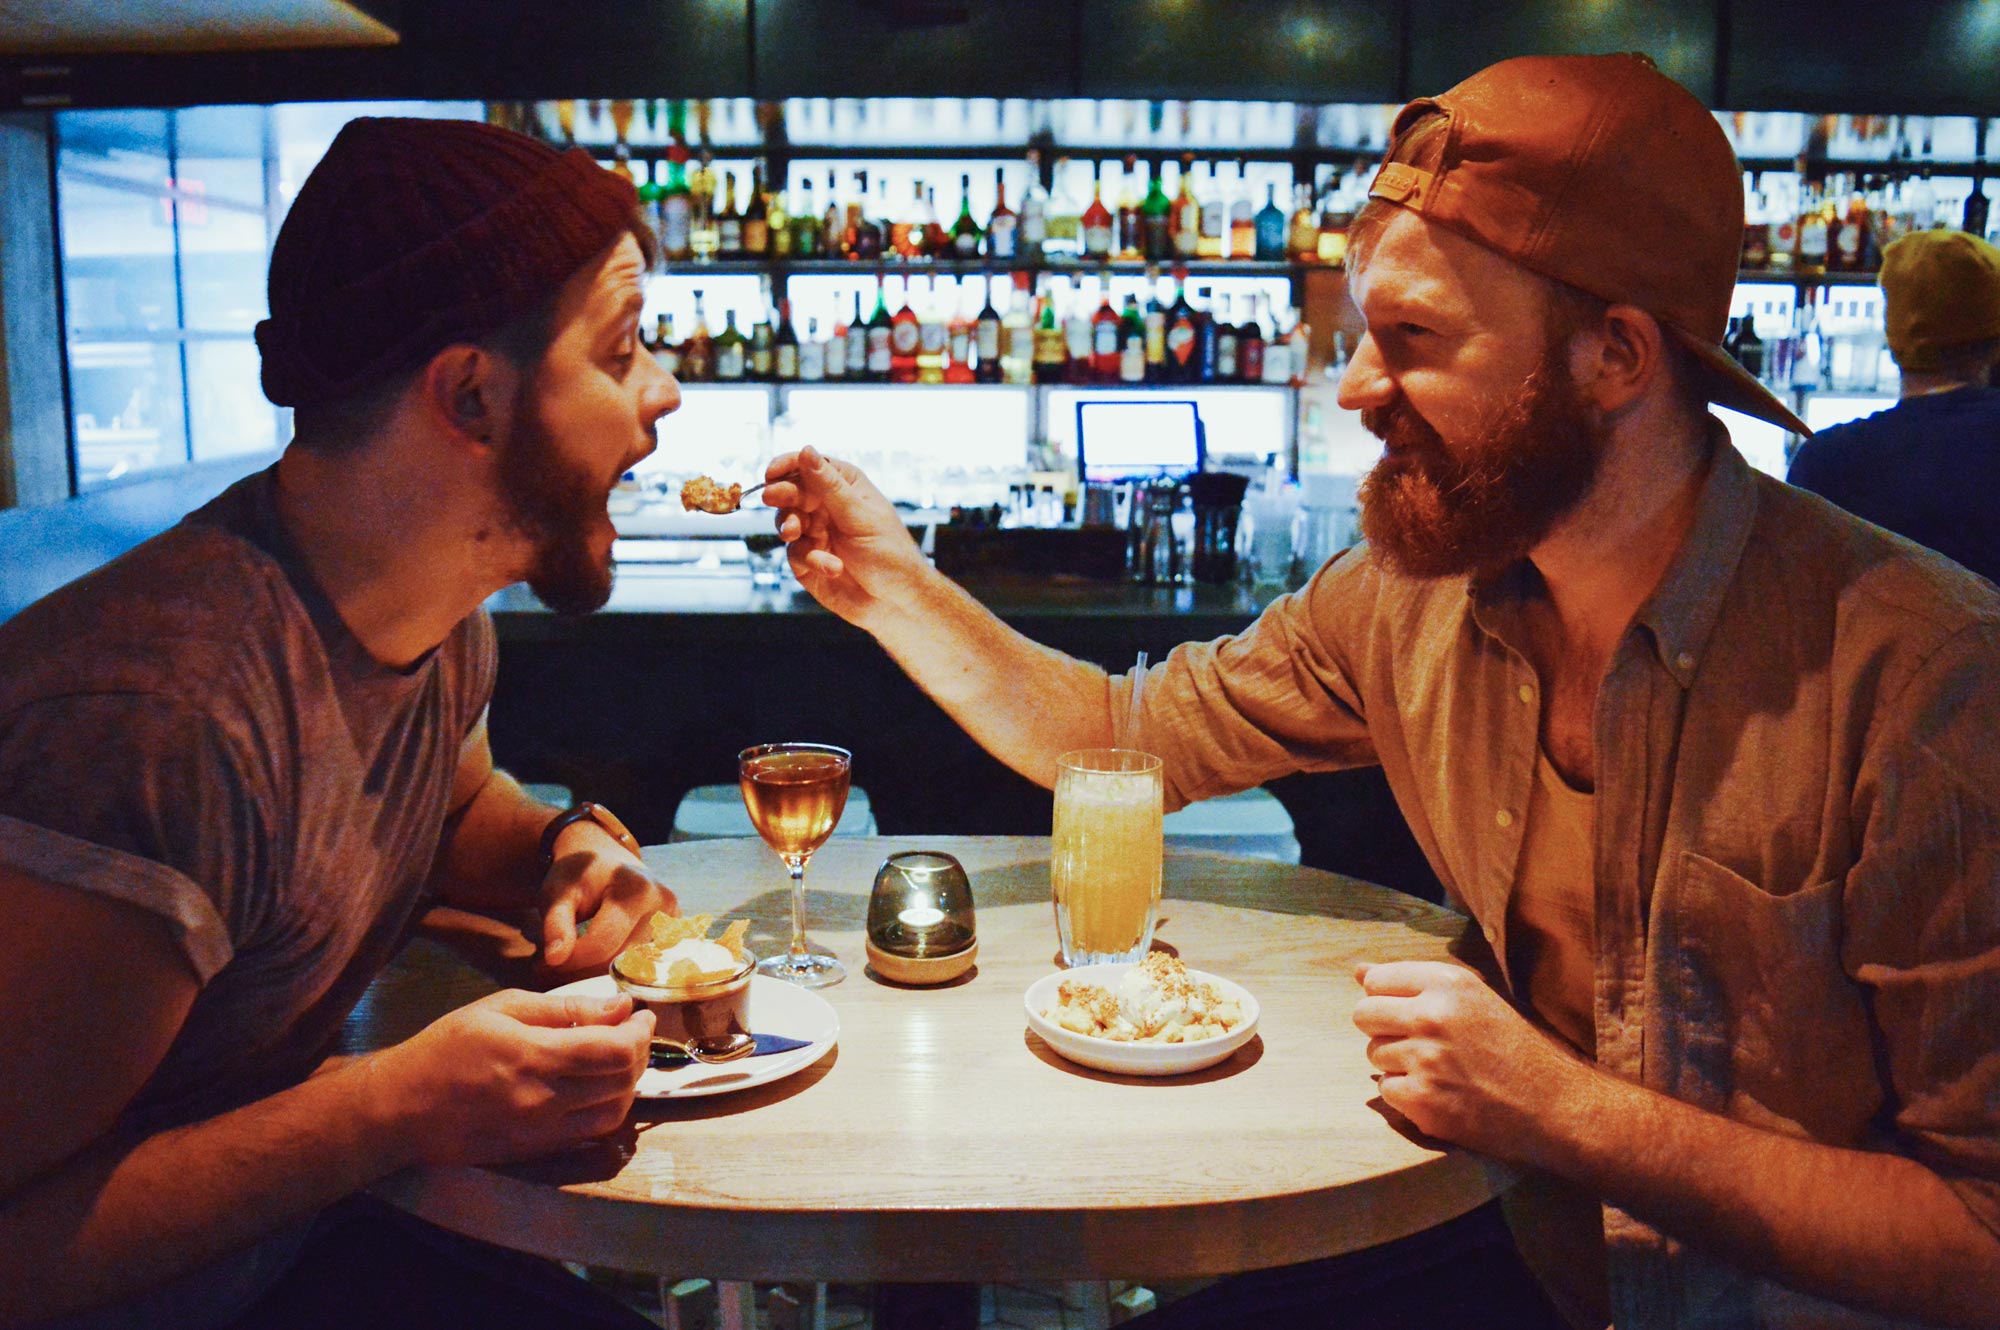 Vancouver: 10 of the Best Gay-friendly Restaurants